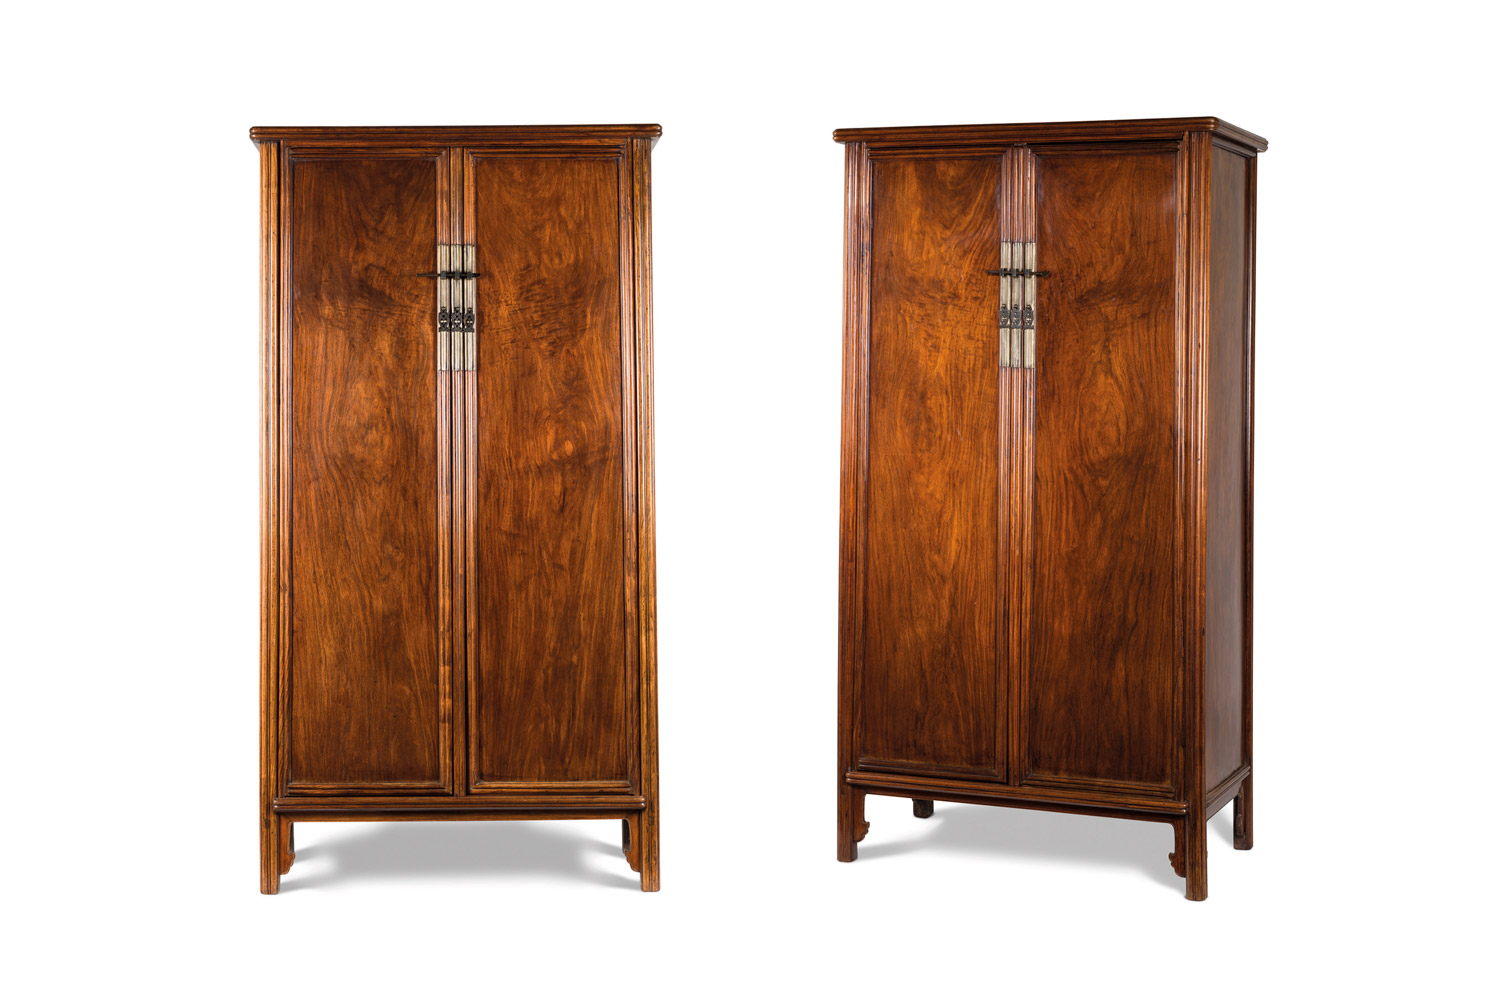 Christie’s presents rare pieces of furniture from the Ming & Qing dynasties